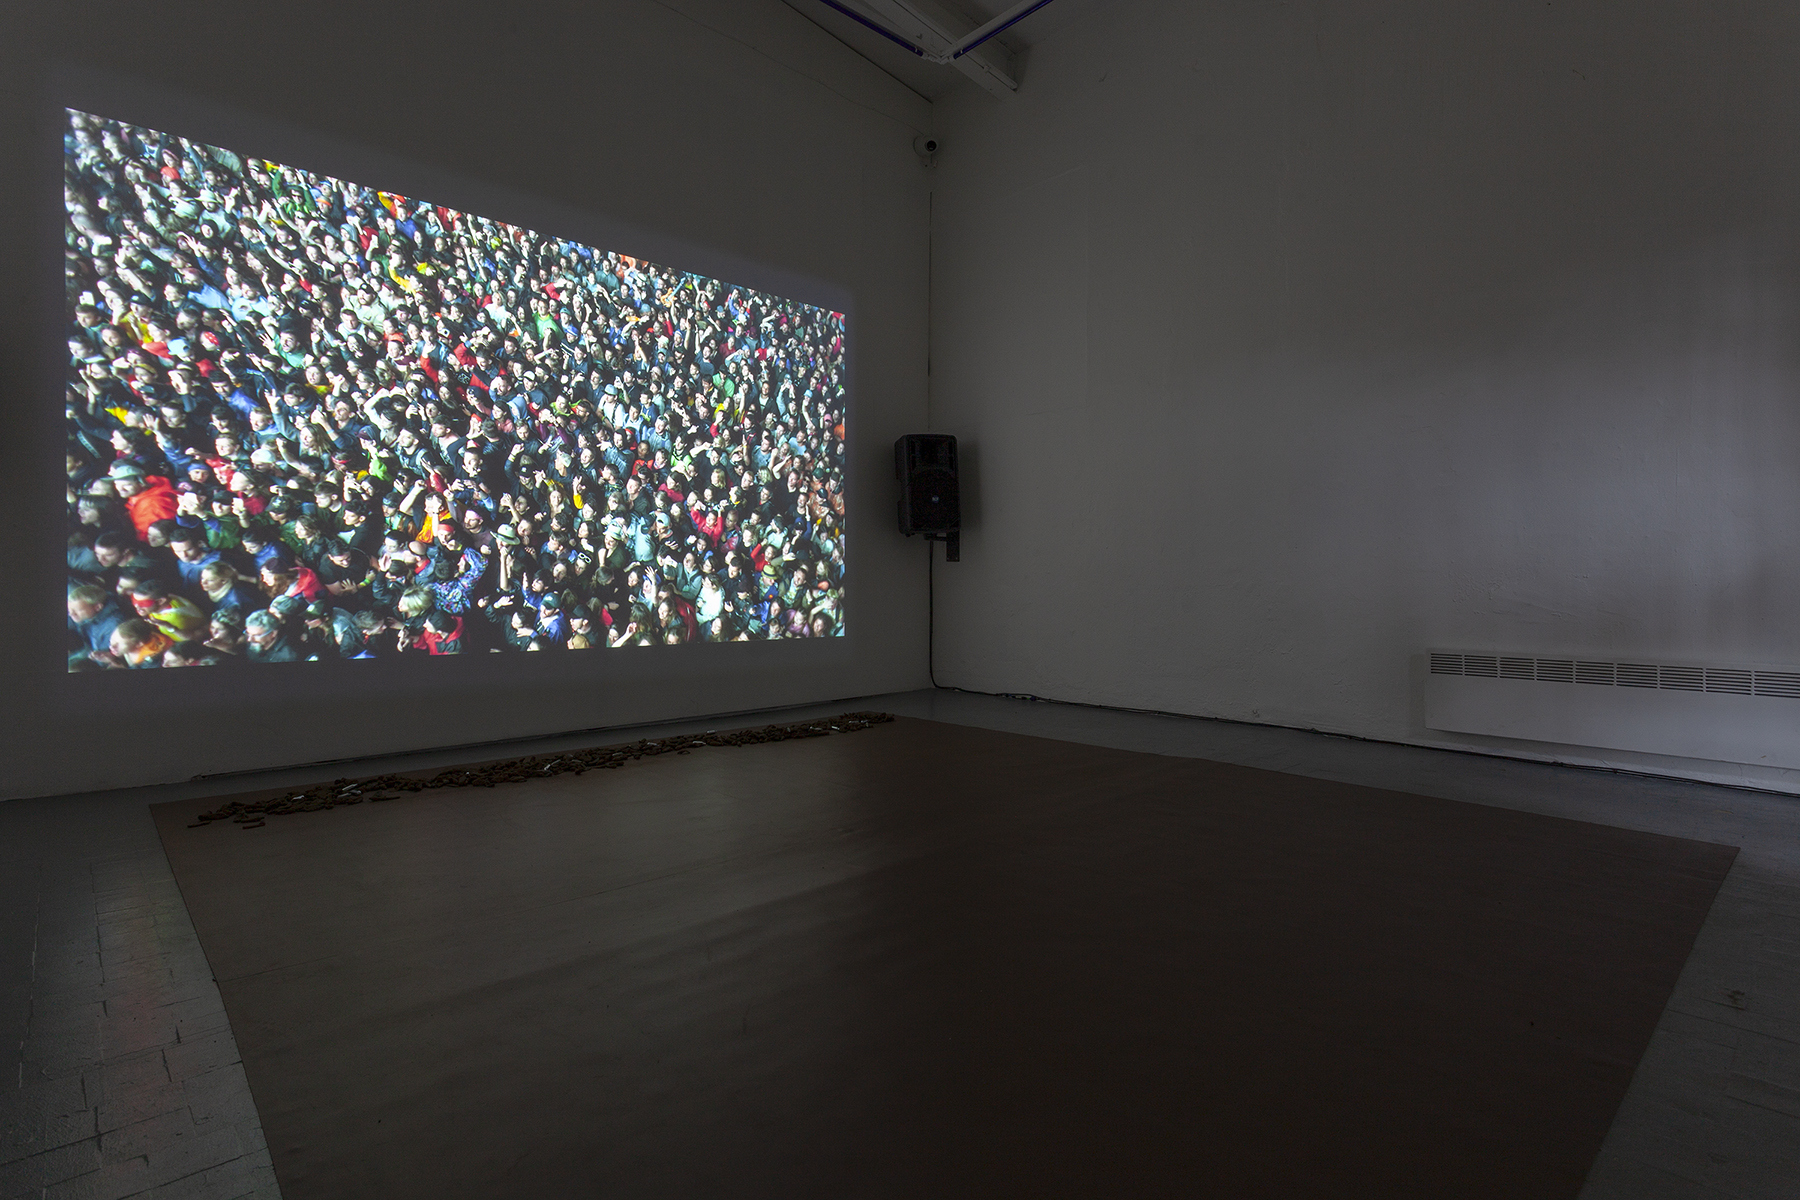 Exhibition view of Trigger at the Contemporary Art Museum of Estonia (EKKM), 2024. Cultes by (LA)HORDE, 2019. Photo by Paul Kuimet.